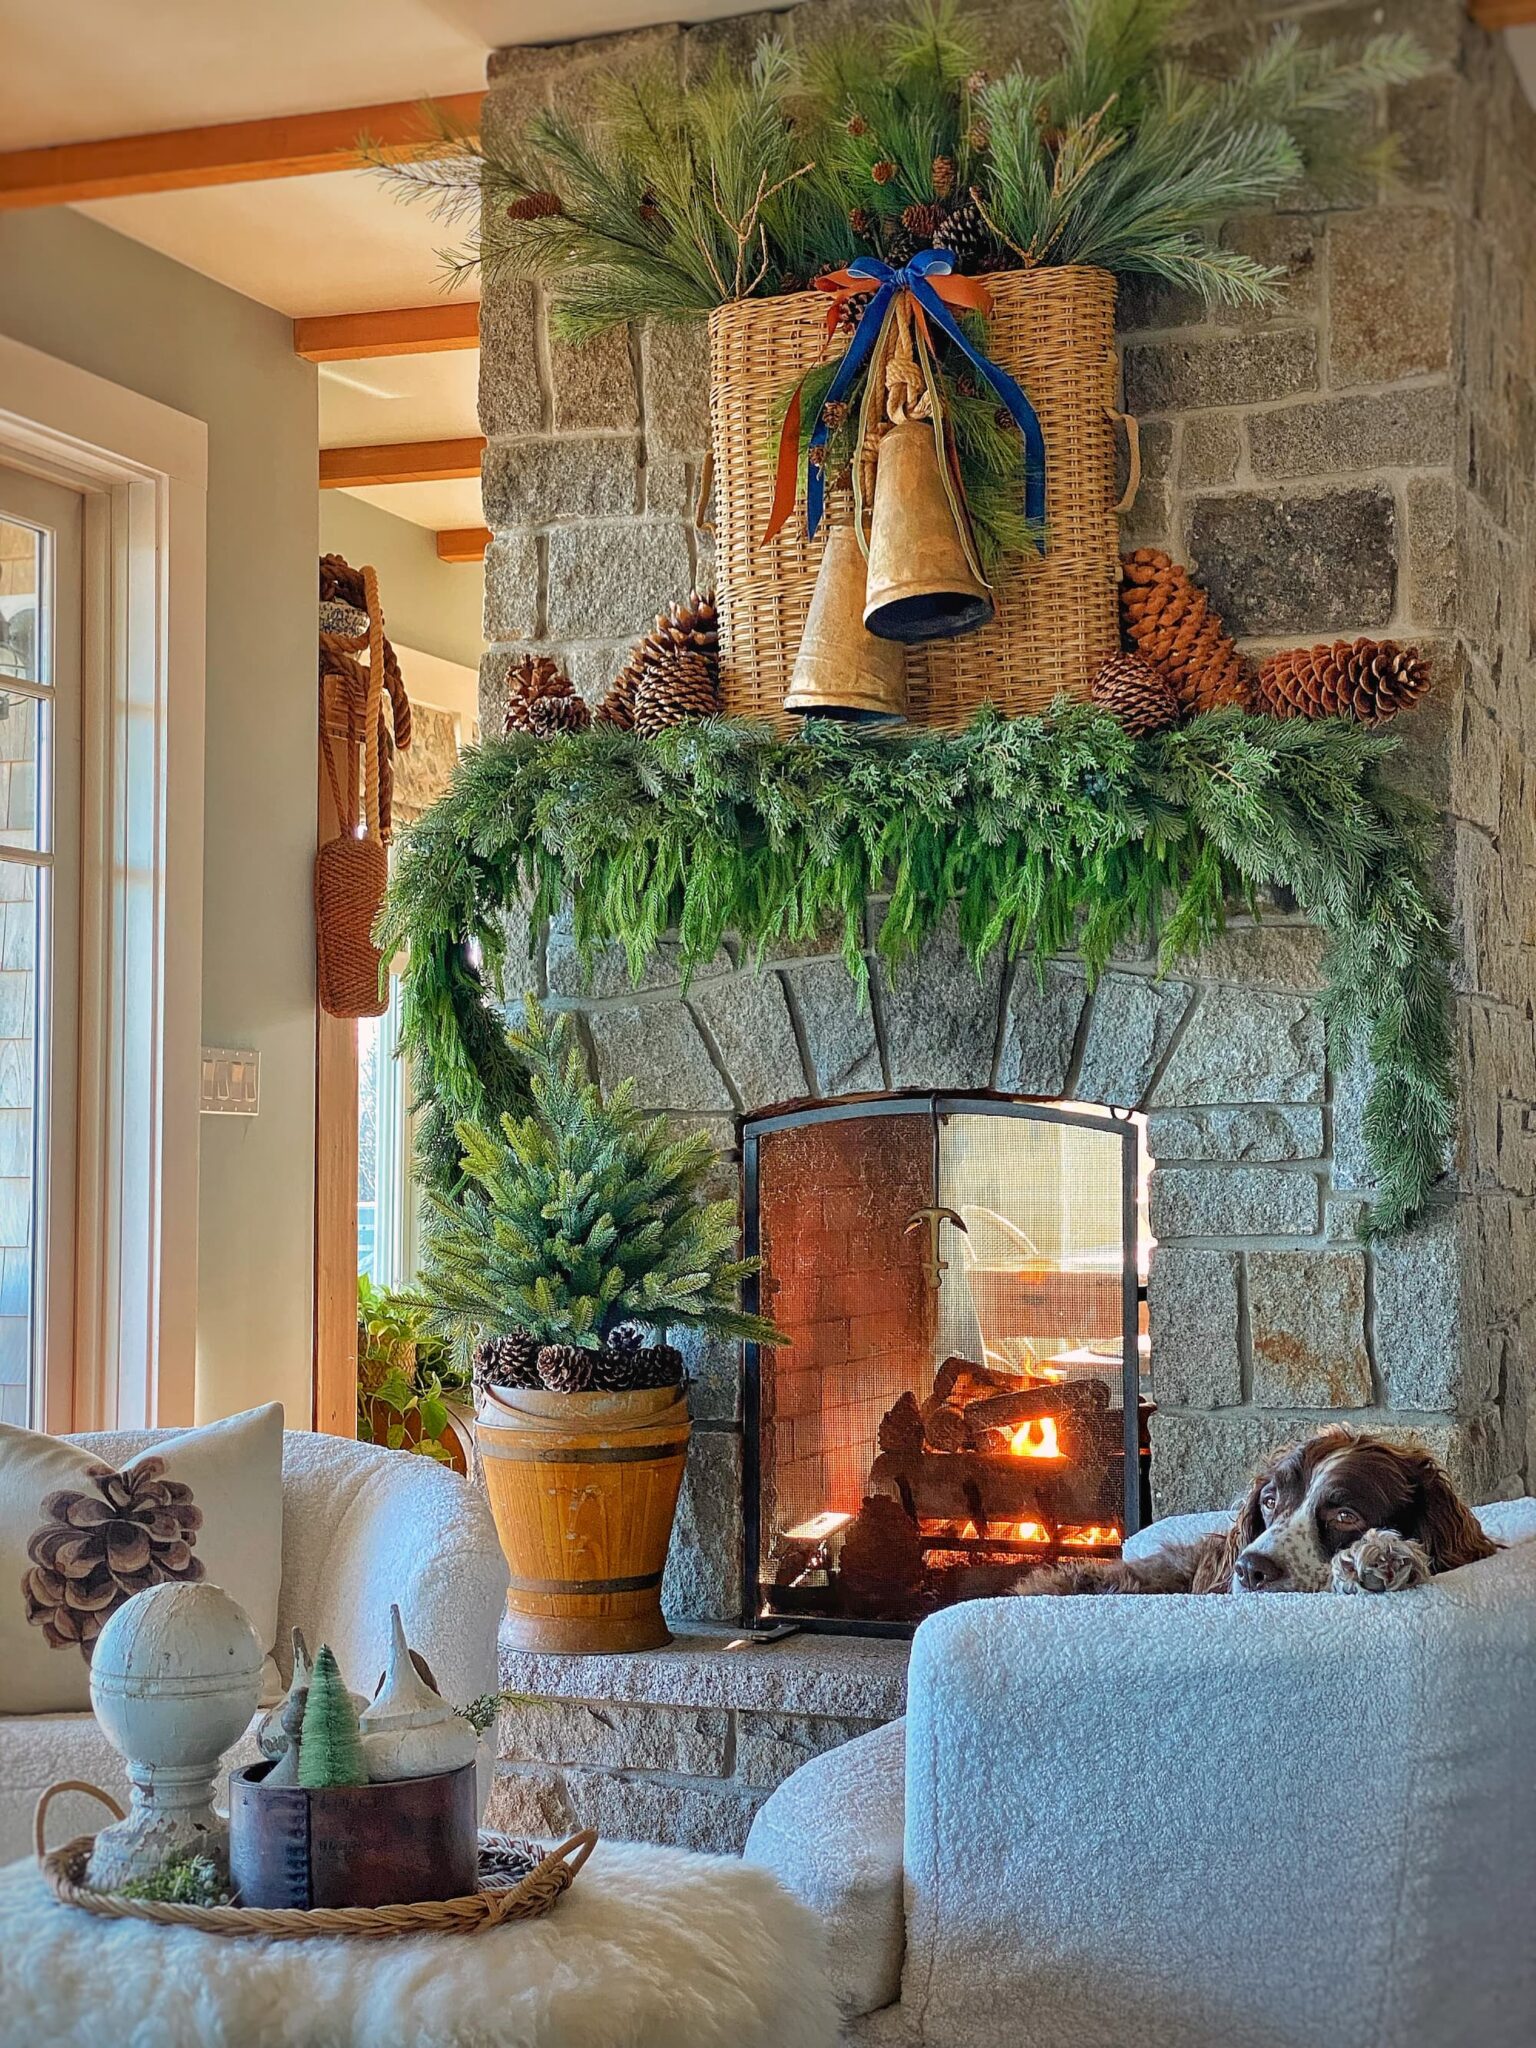 Gorgeous Christmas mantel with natural greenery garland, pinecones, basket and brass bells